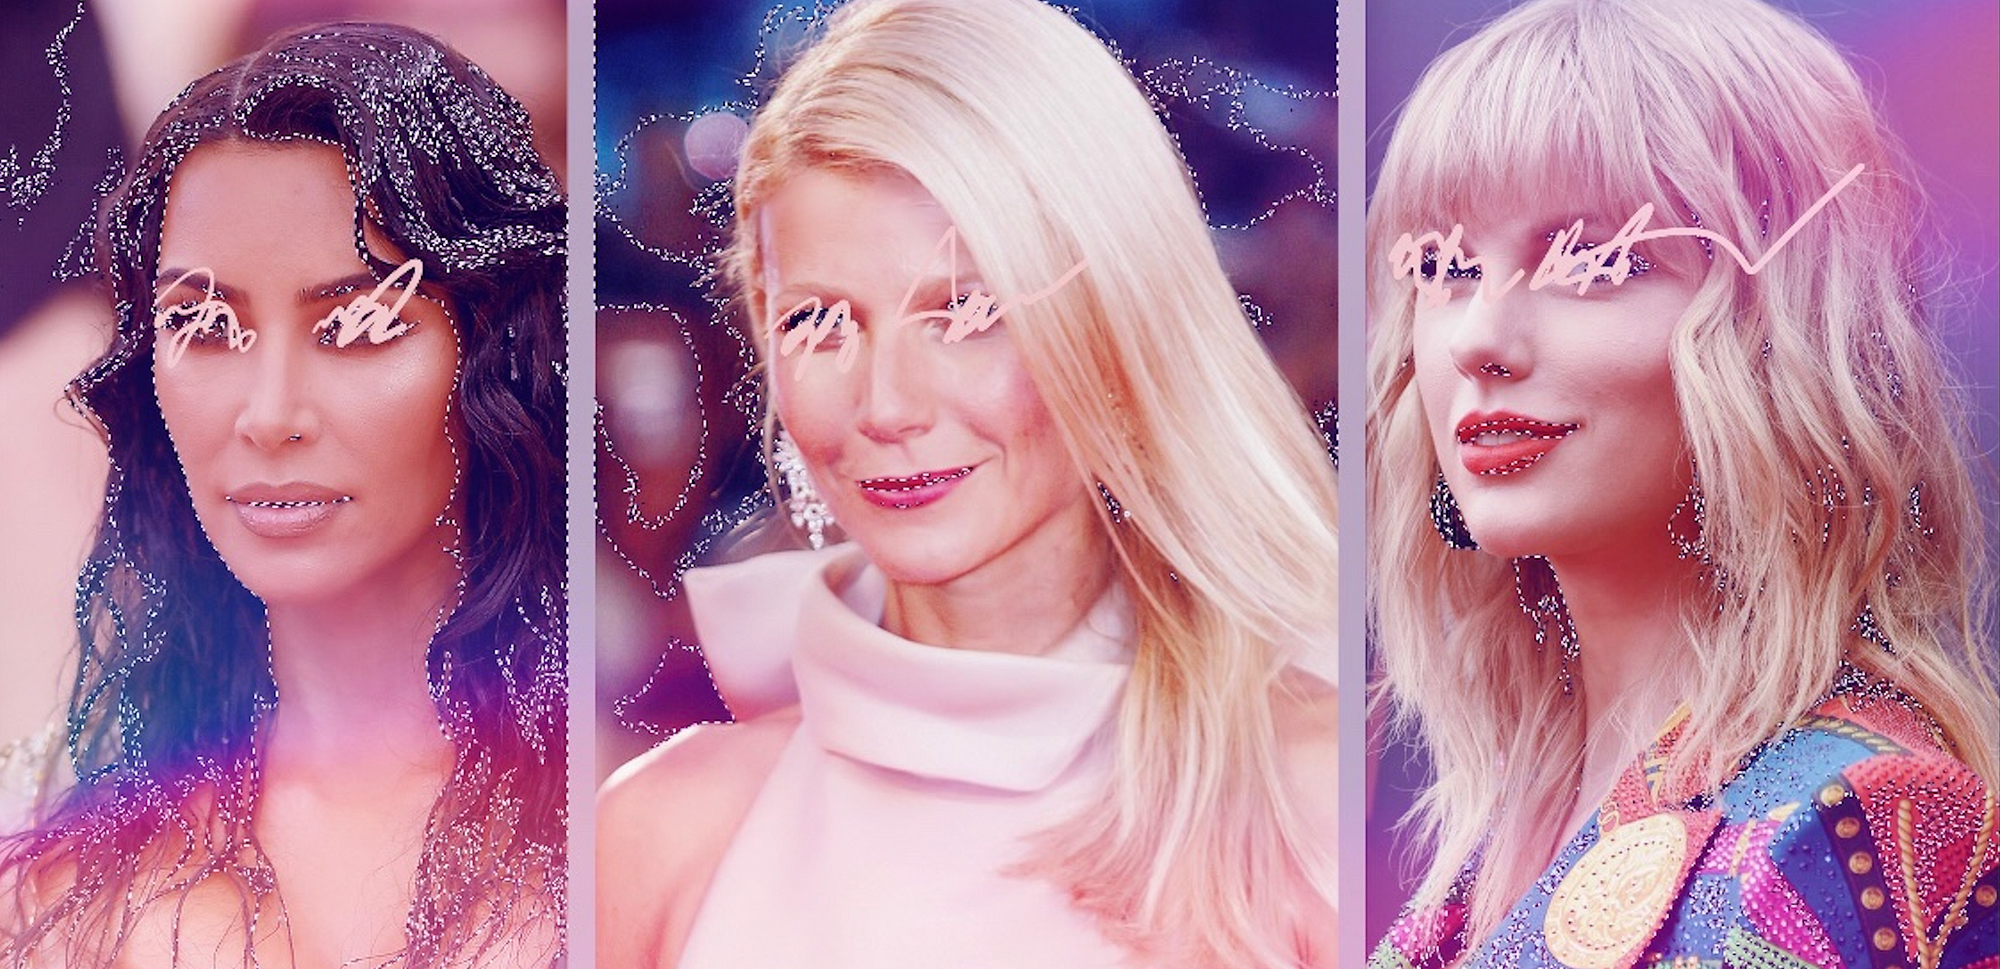 Why Does Everyone Hate Gwyneth Paltrow? by Tyler A pic photo